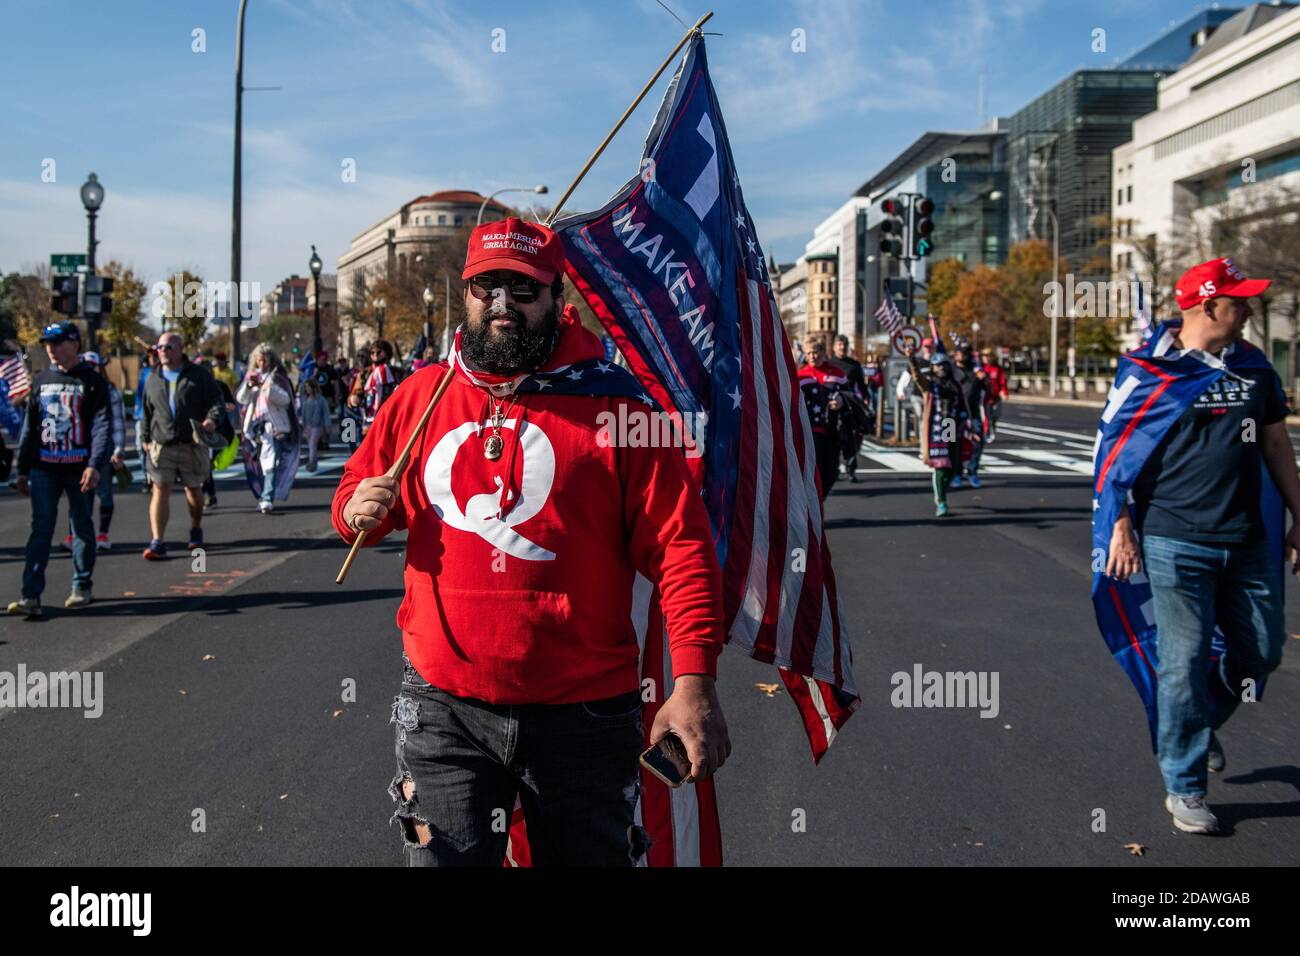 Washington, DC, United States. 14th Nov, 2020. WASHINGTON D.C., NOVEMBER 14- A Qanon supporter marches in route to the Supreme Court during the Million Maga March protest regarding election results on November 14, 2020 in Washington, DC Photo: Chris Tuite/ImageSPACE Credit: Imagespace/Alamy Live News Stock Photo